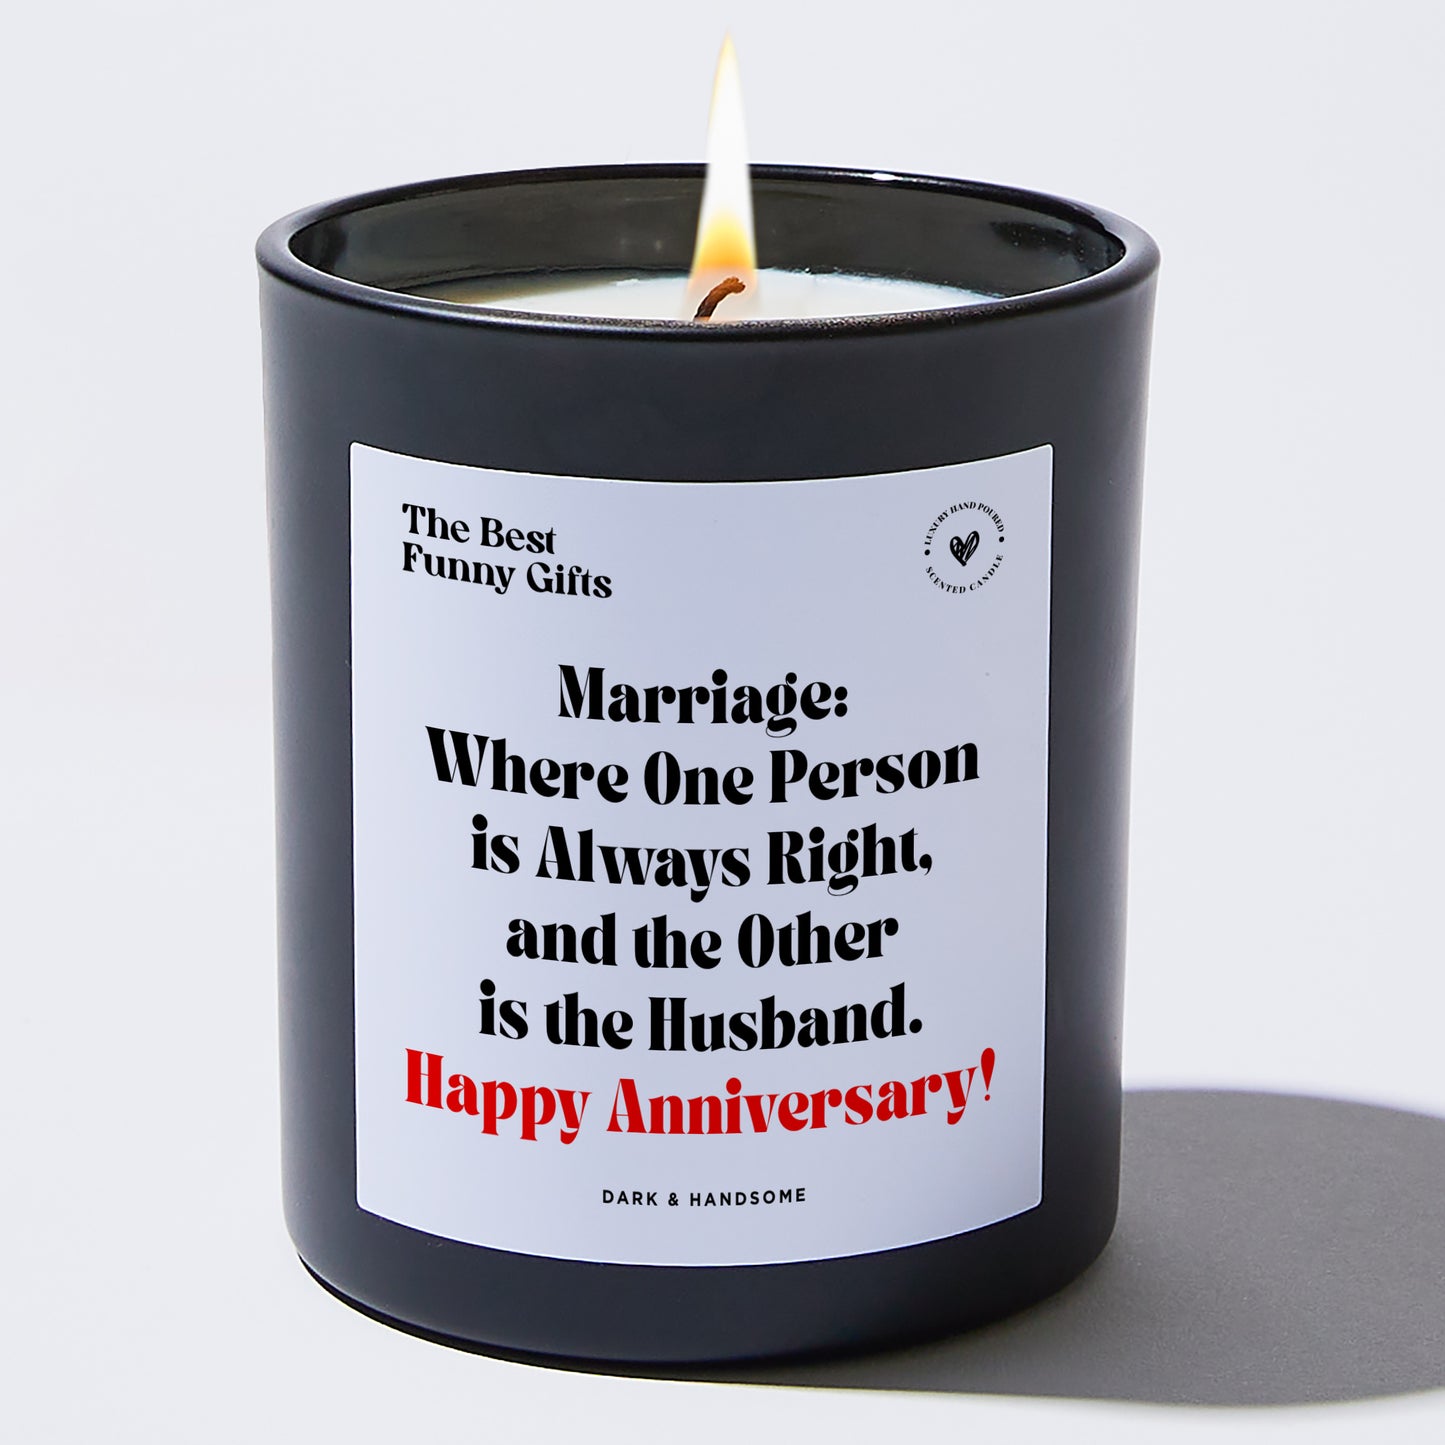 Anniversary Present - Marriage: Where One Person is Always Right, and the Other is the Husband. Happy Anniversary! - Candle